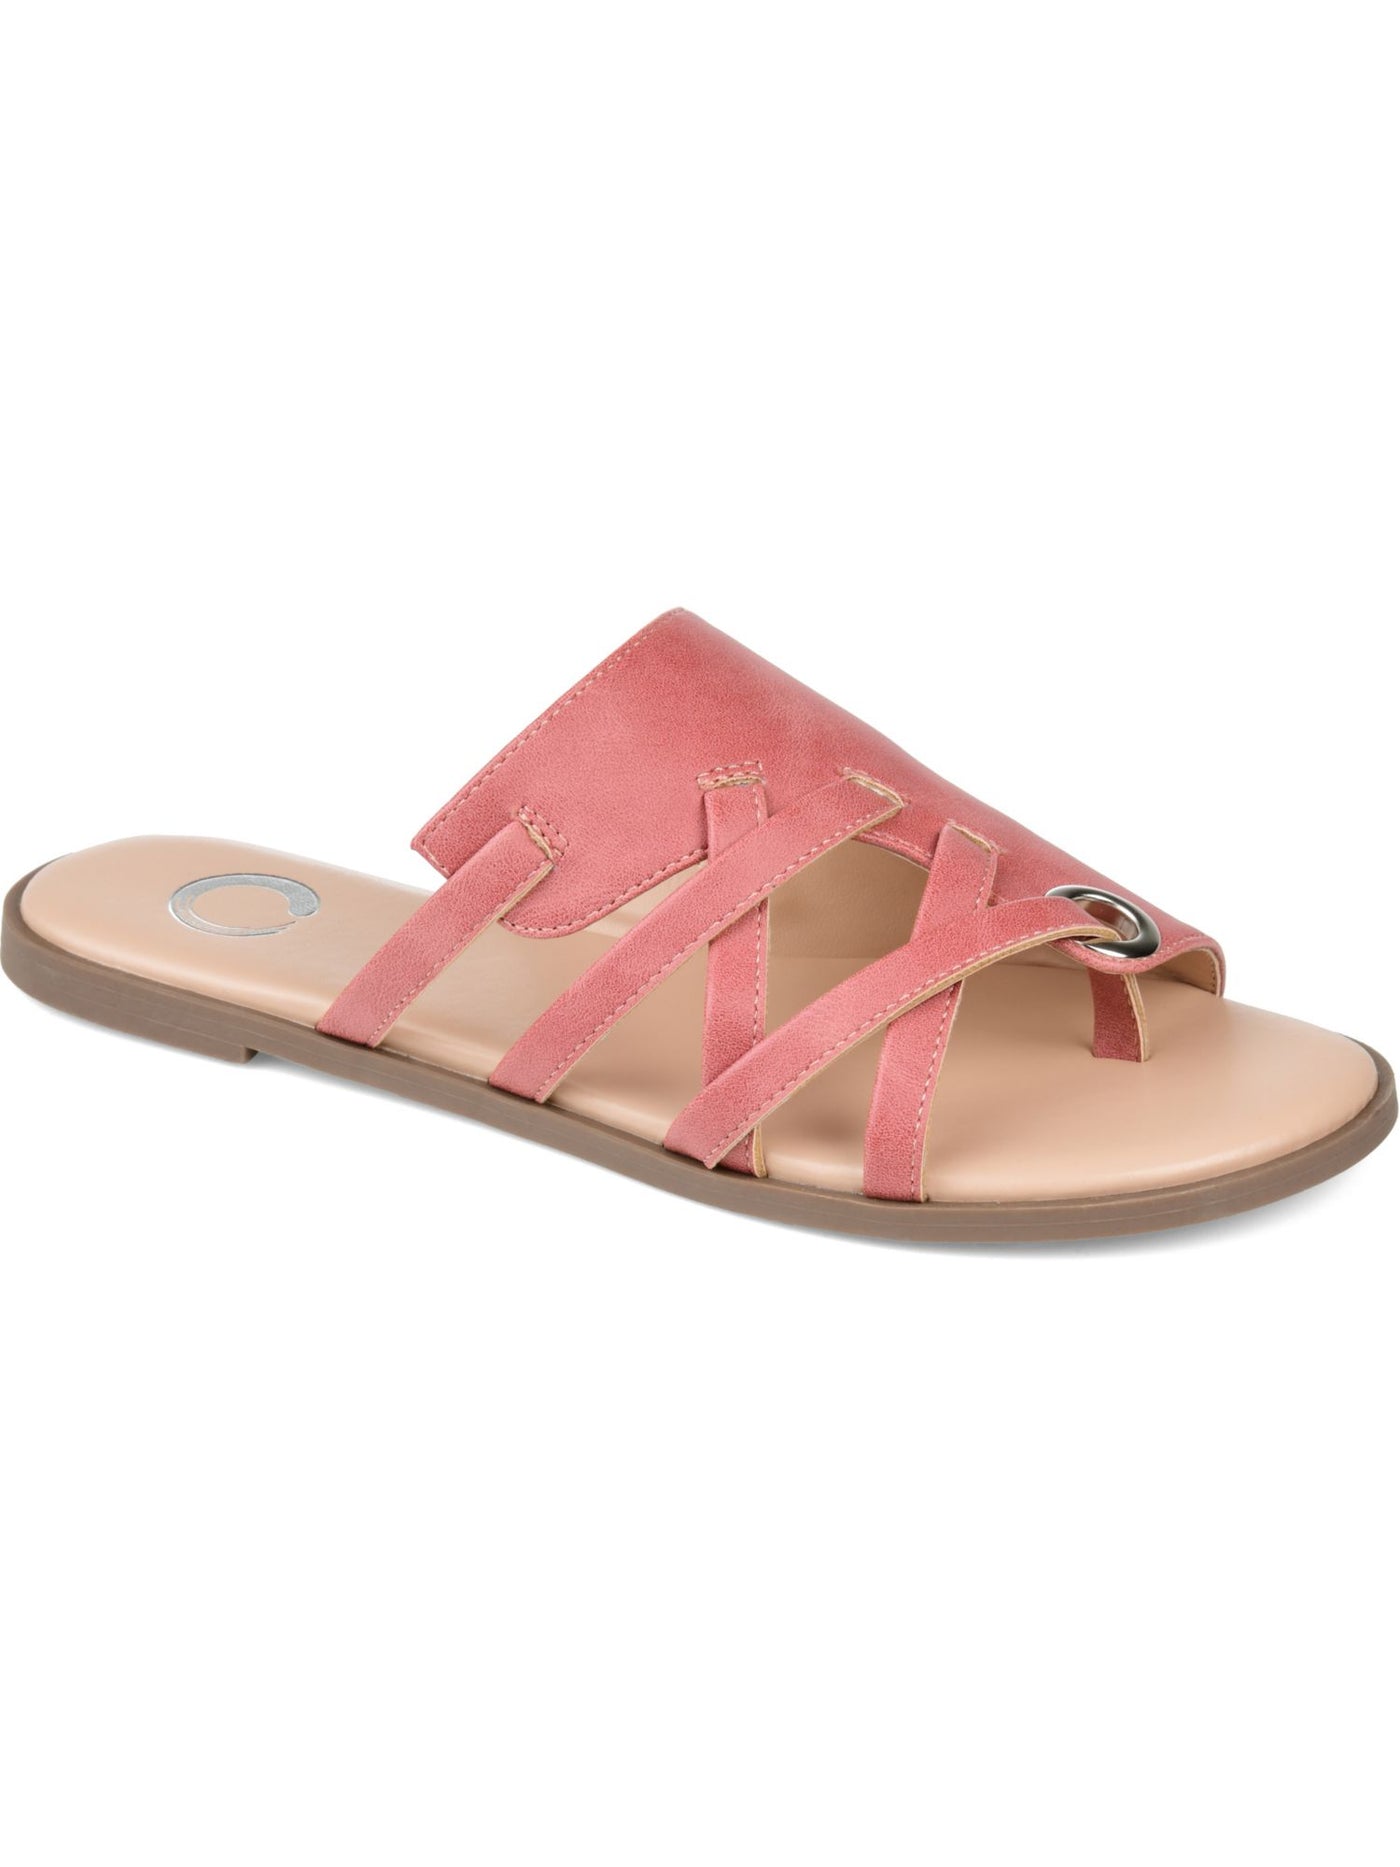 JOURNEE COLLECTION Womens Pink Padded Grommet Detail Asymmetrical Strappy Hasten Round Toe Slip On Sandals 8